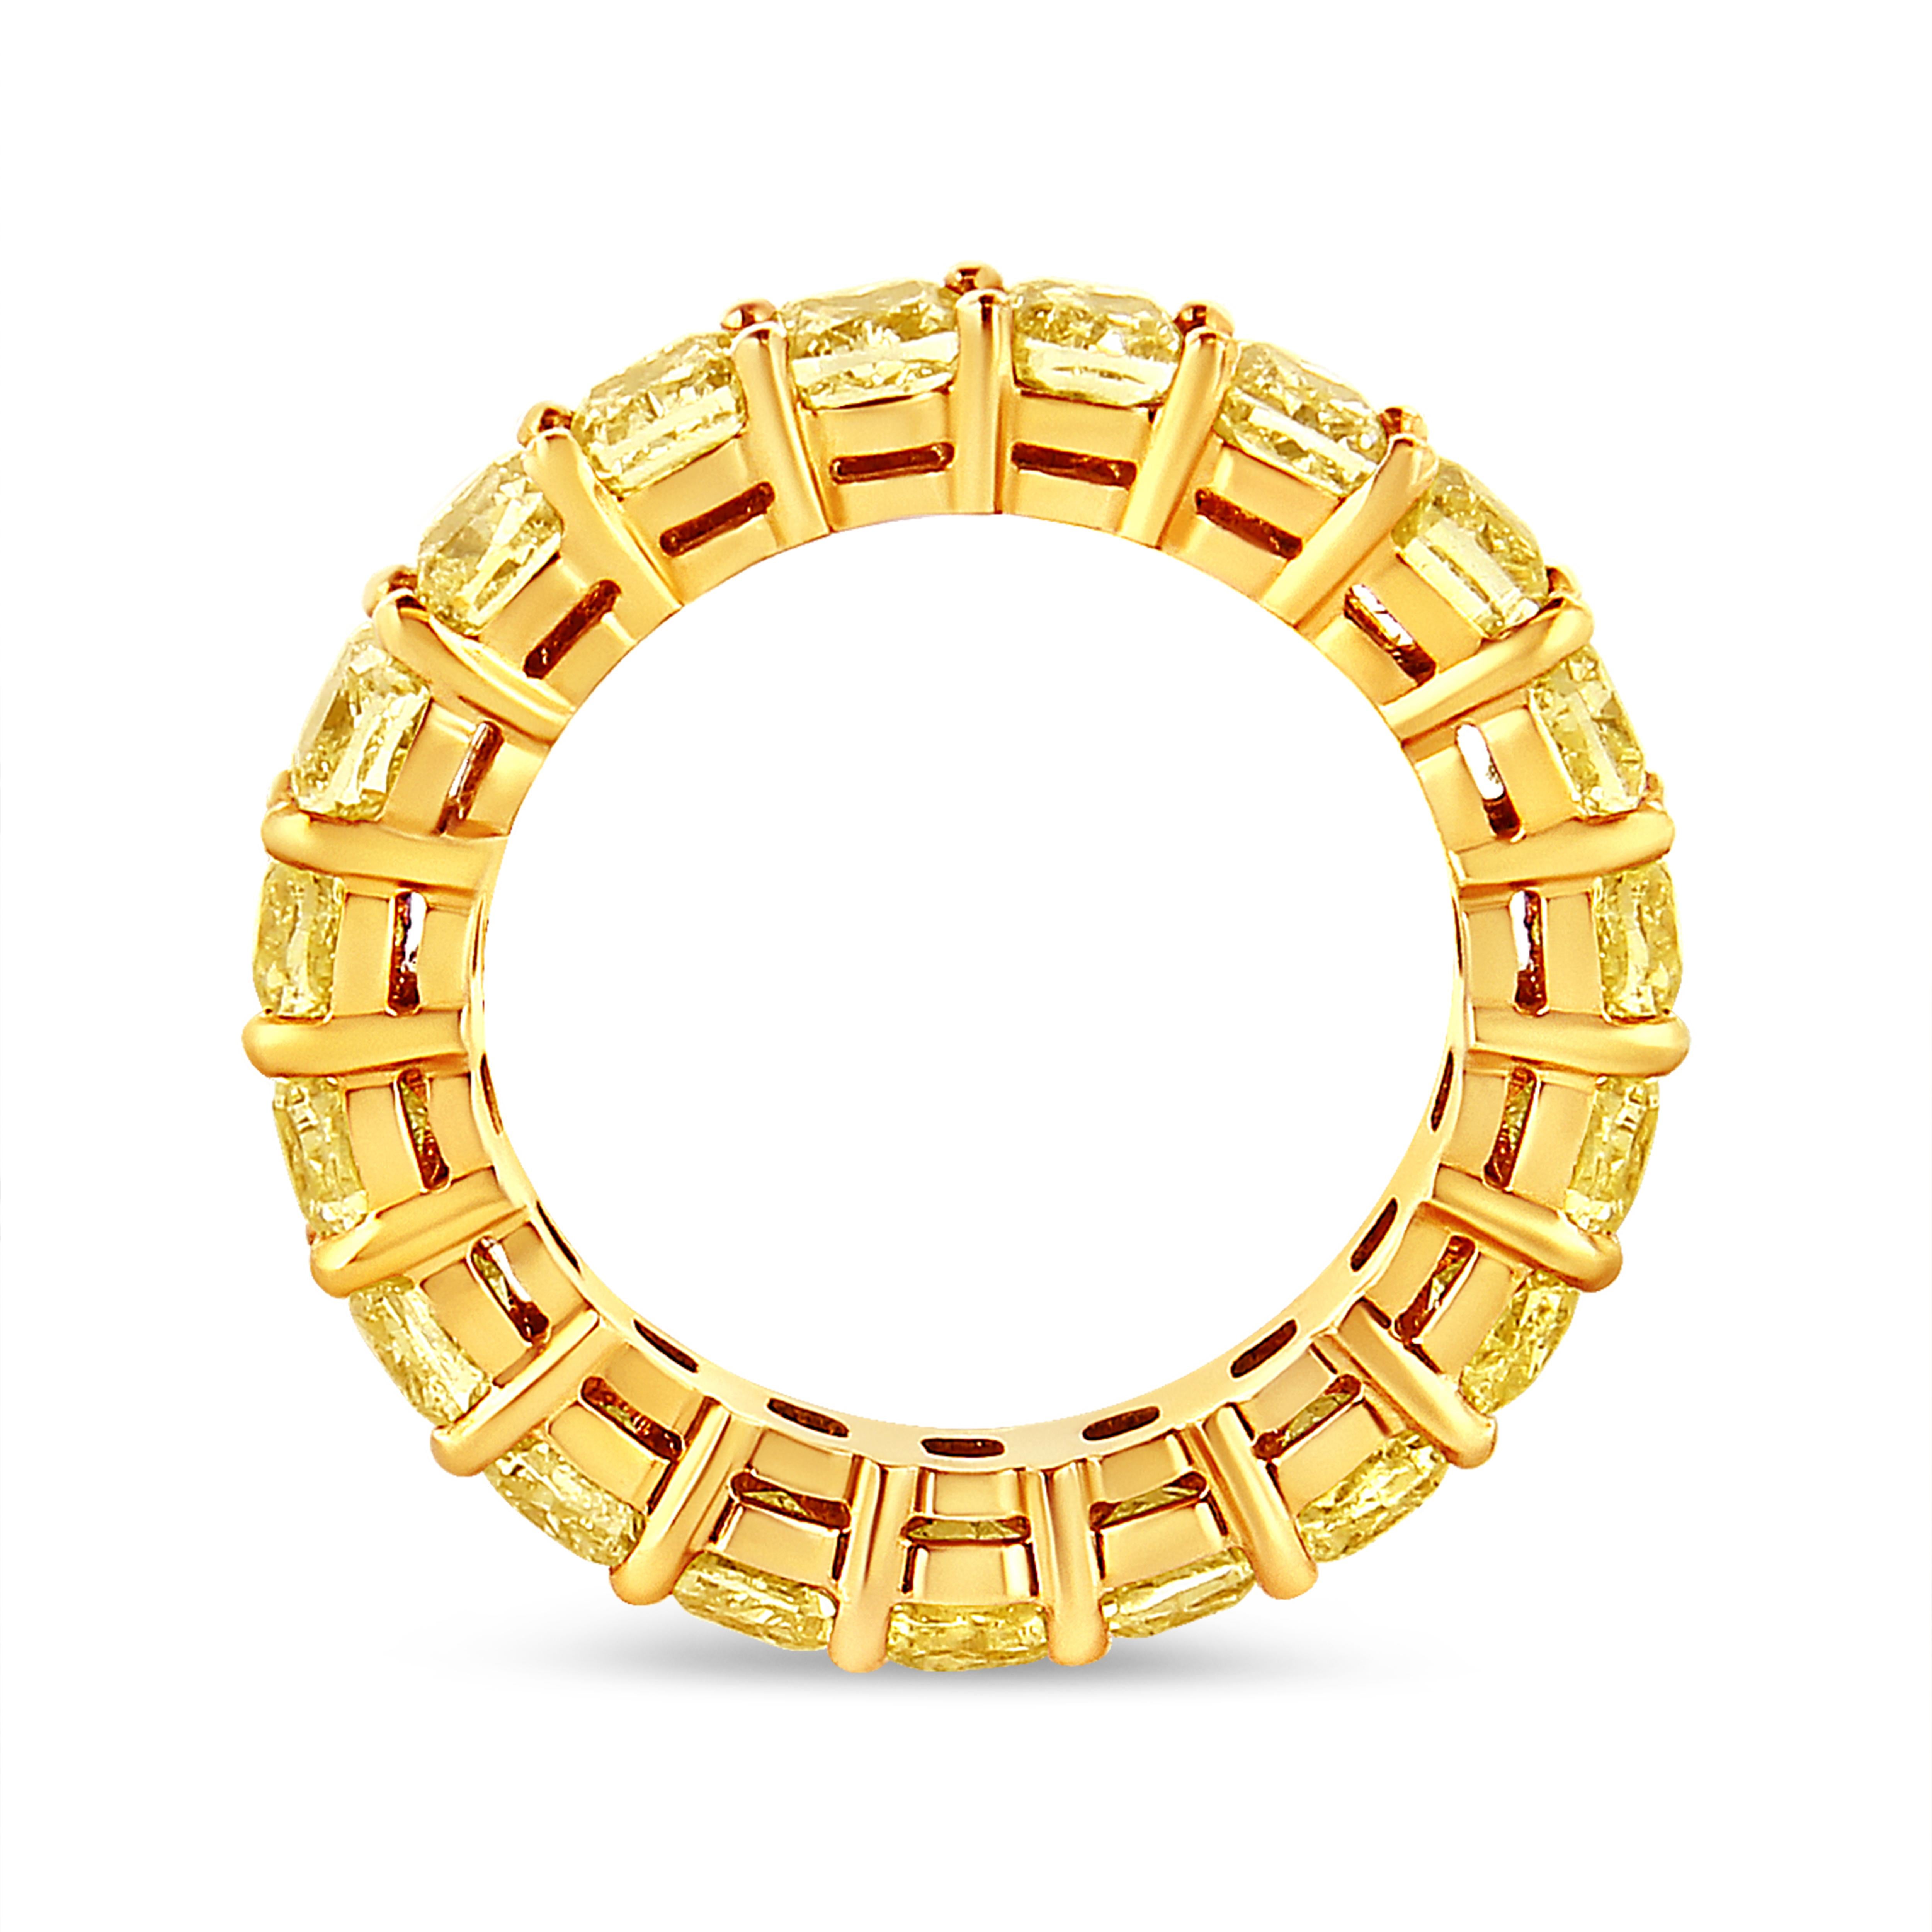 Contemporary IGI Certified 18K Yellow Gold 5.0 Cttw Yellow Cushion Diamond Eternity Band Ring For Sale